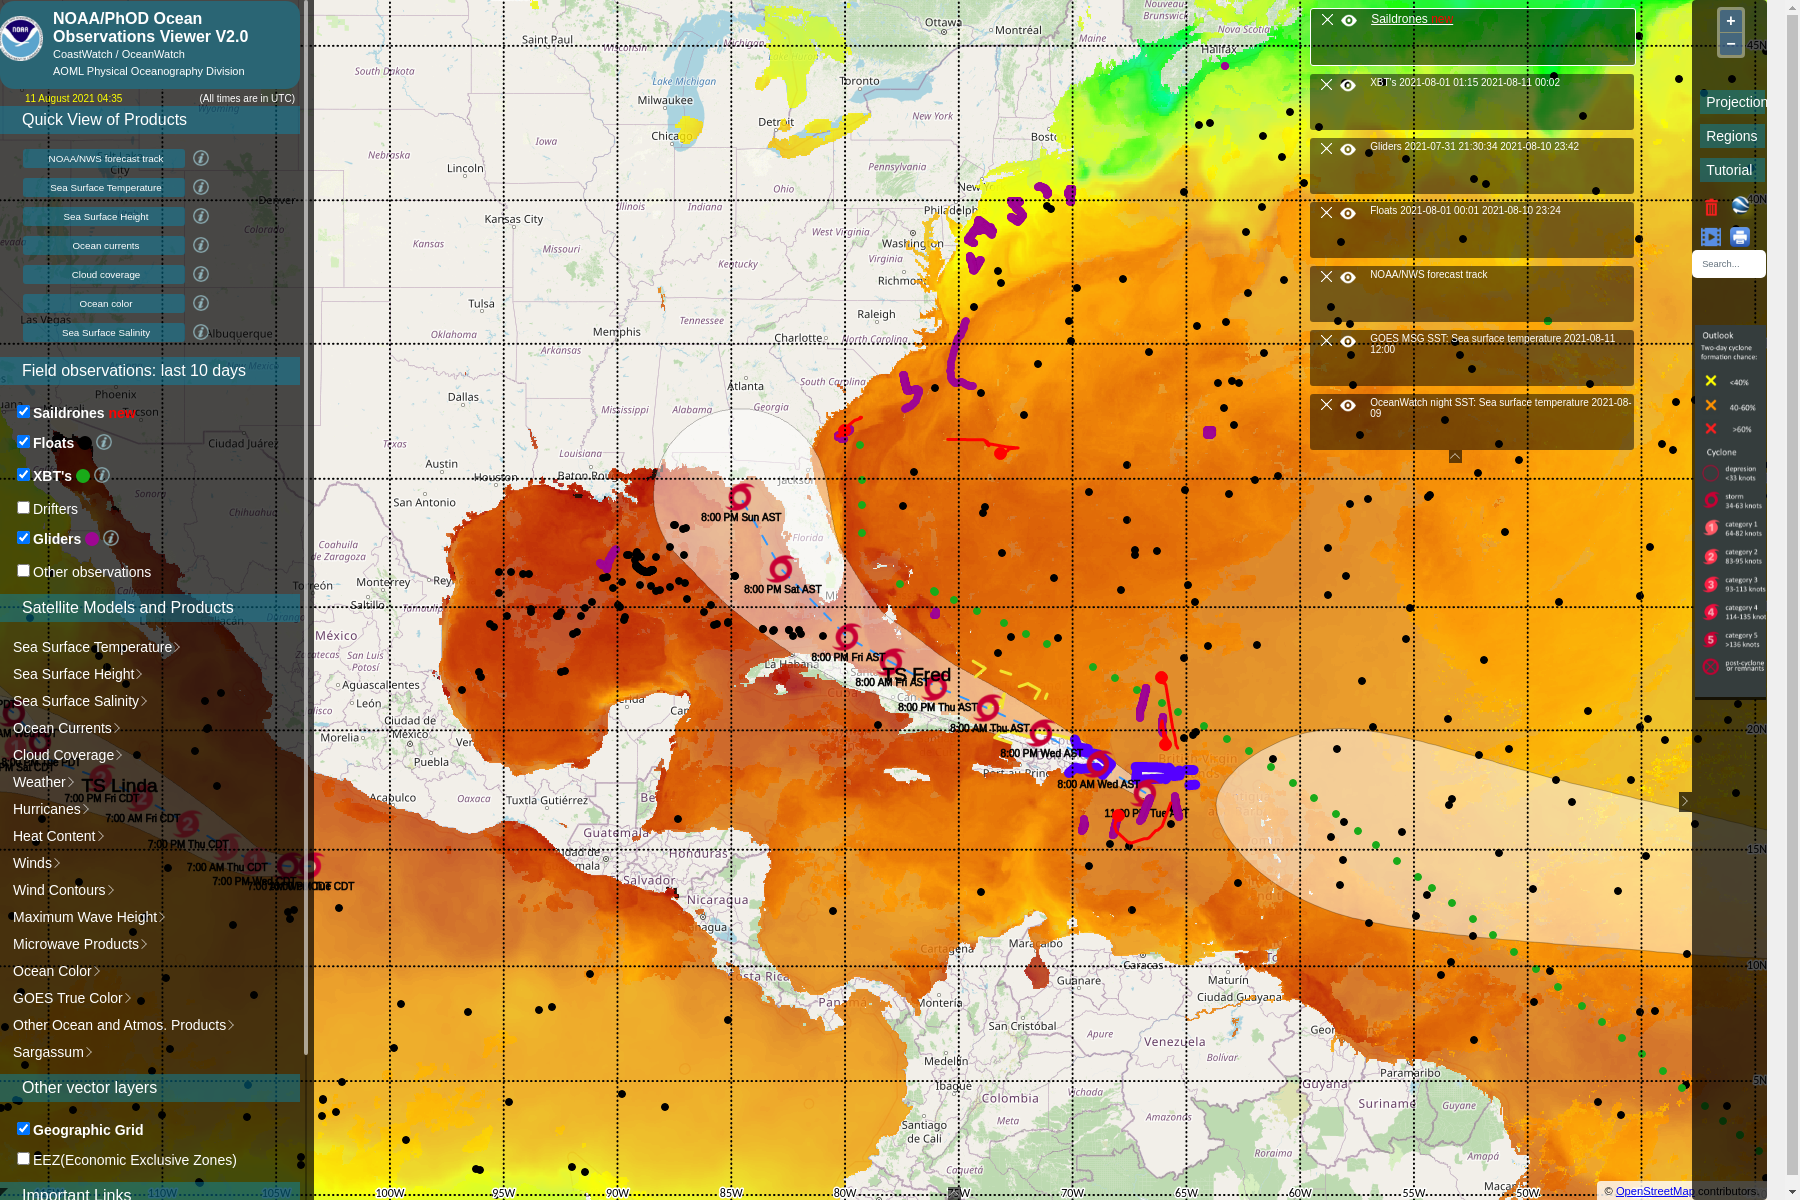 The saildrone south of Puerto Rico recorded Tropical Depression Fred as it passed by.